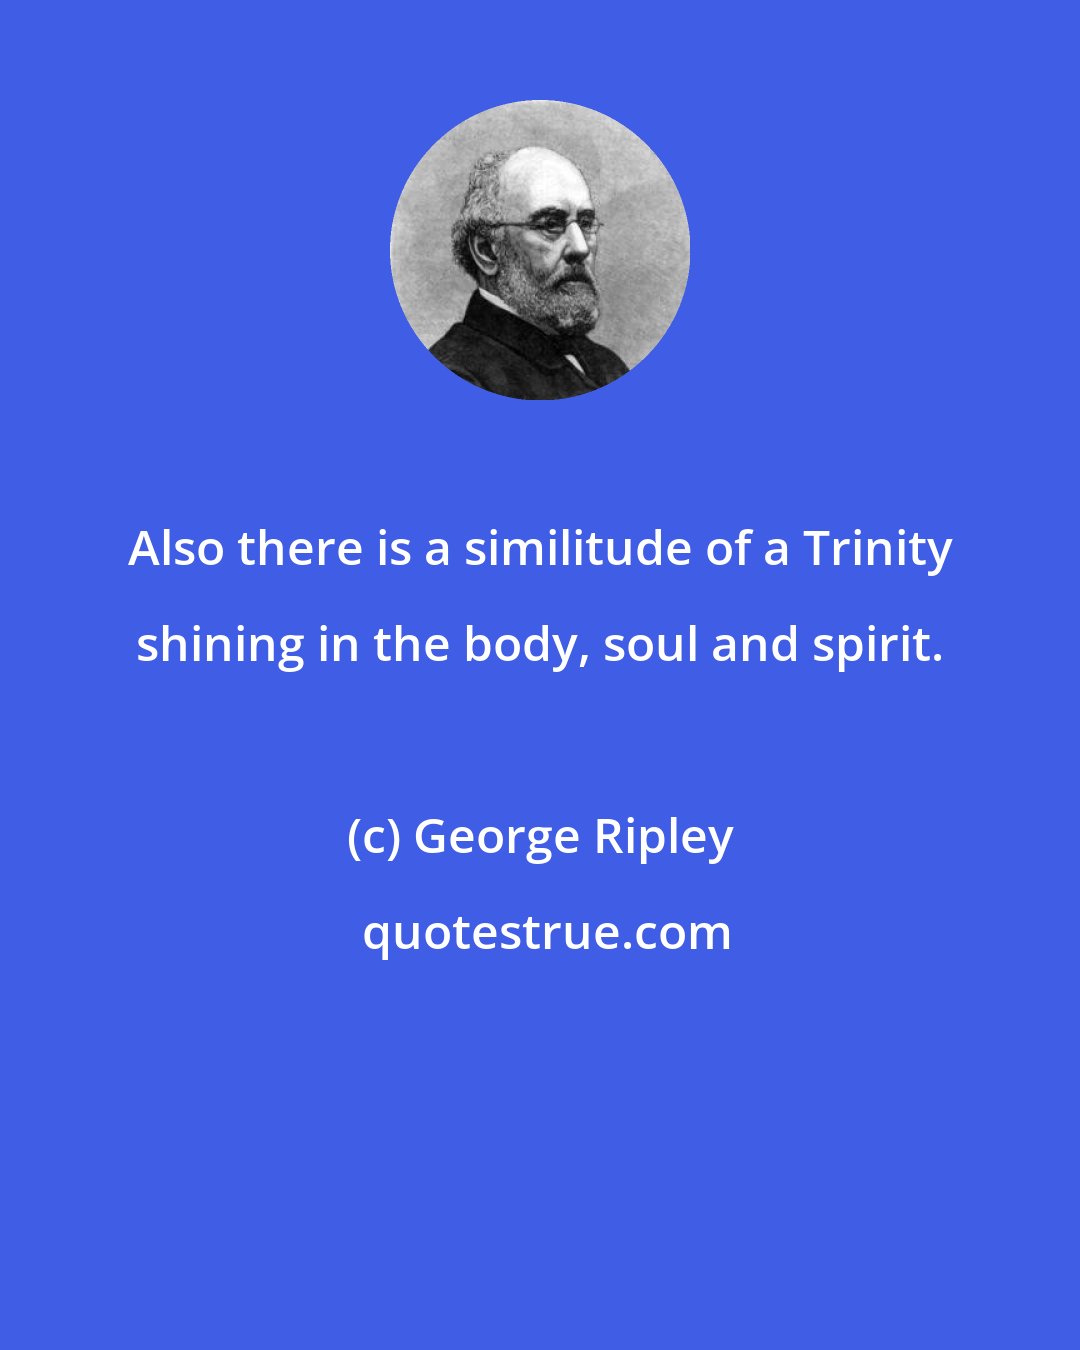 George Ripley: Also there is a similitude of a Trinity shining in the body, soul and spirit.